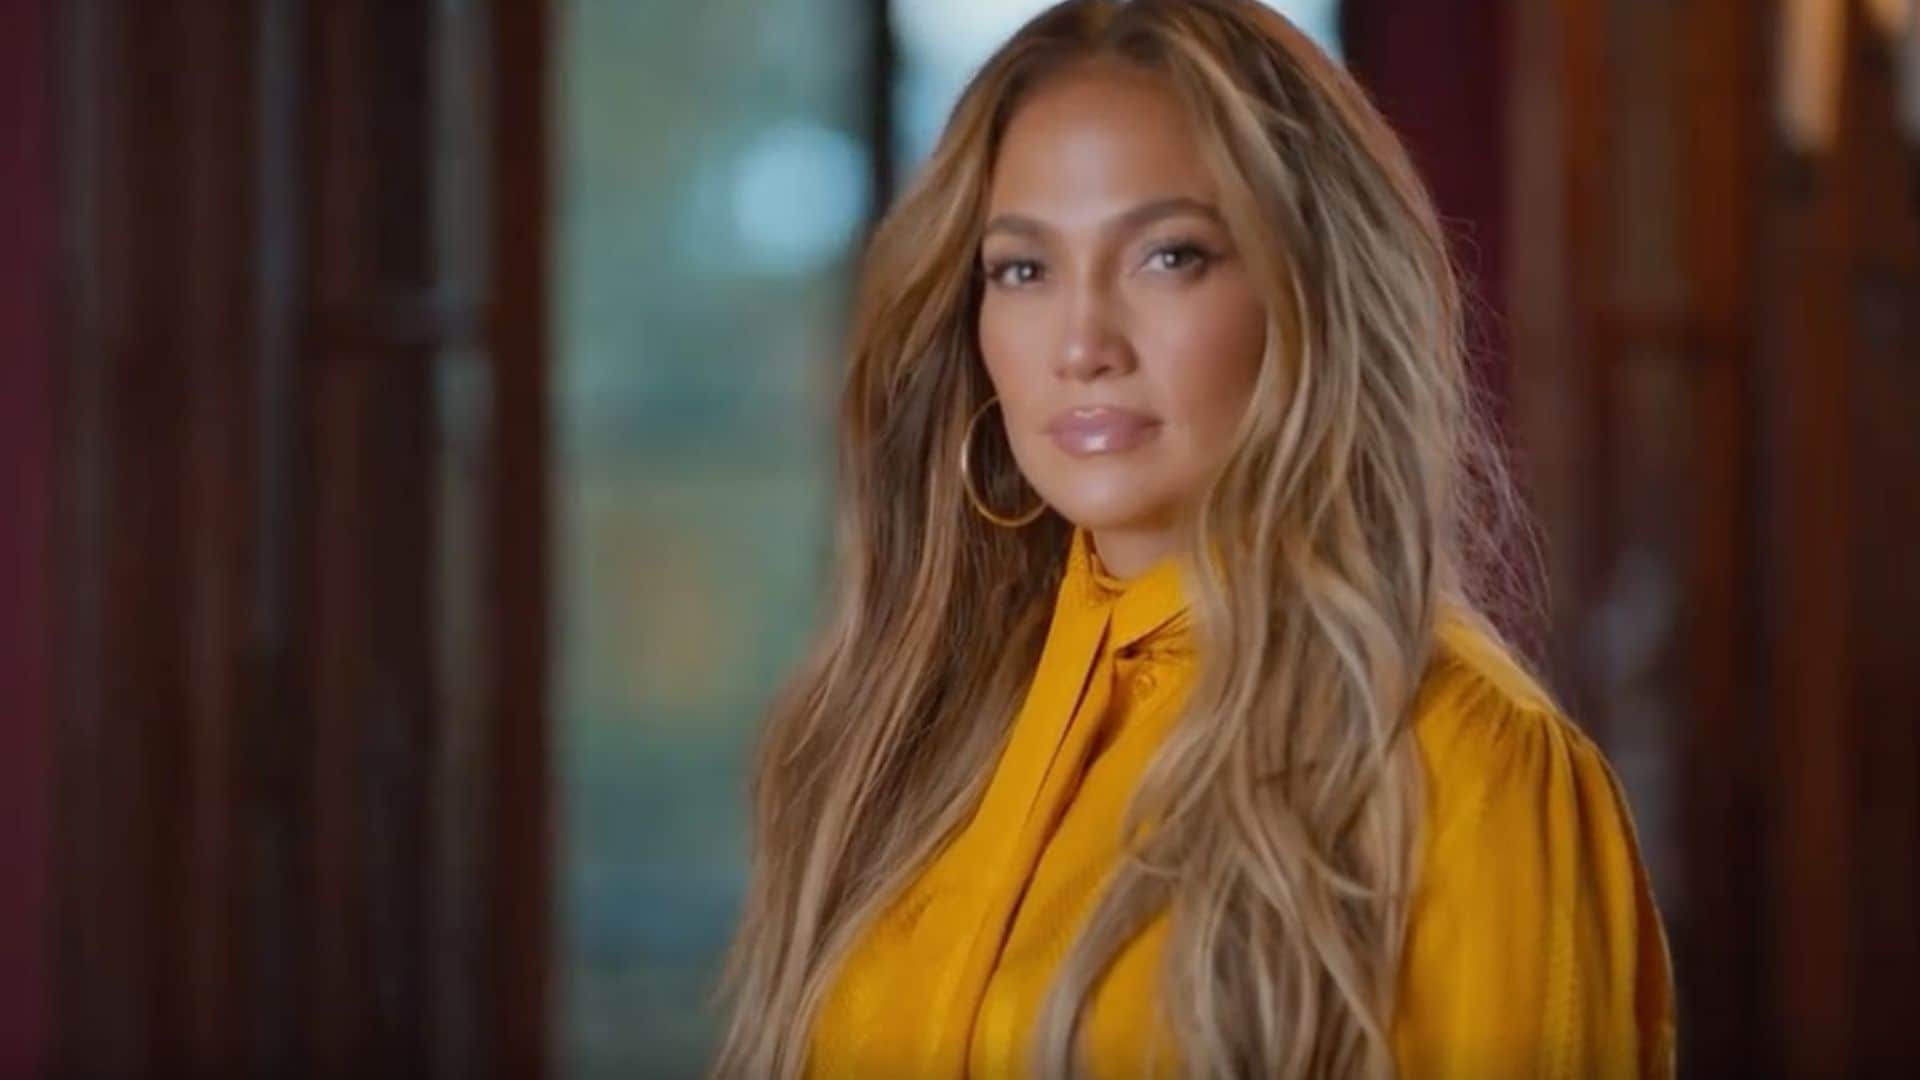 Jennifer Lopez reveals what drives her in powerful speech: ‘I never described it this way’